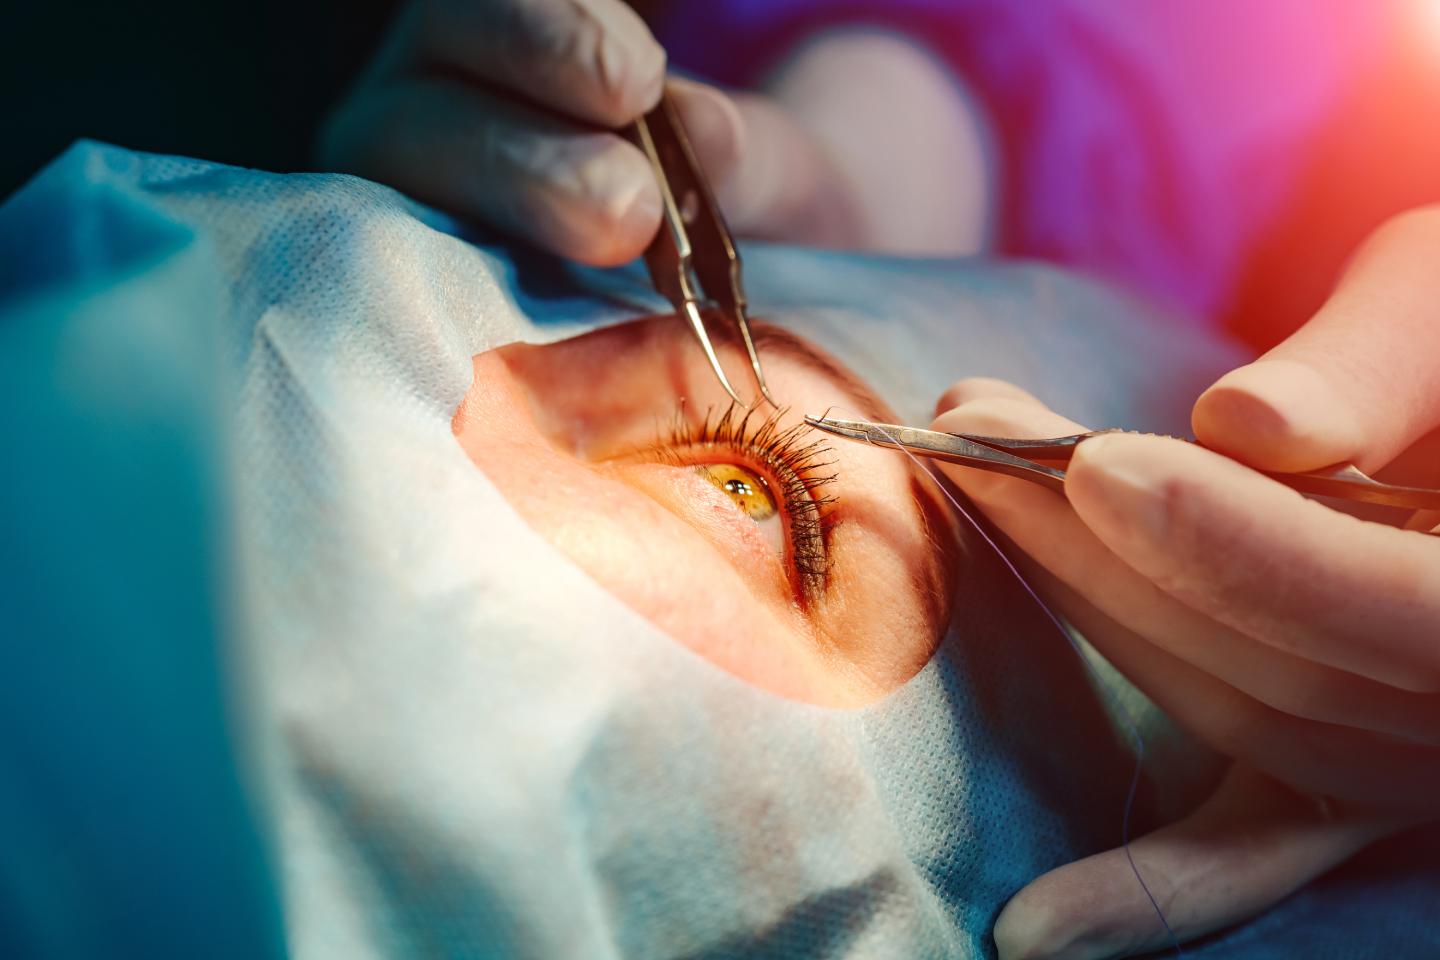 Cataract Surgery: Causes, Prevention, Diagnosis & Types